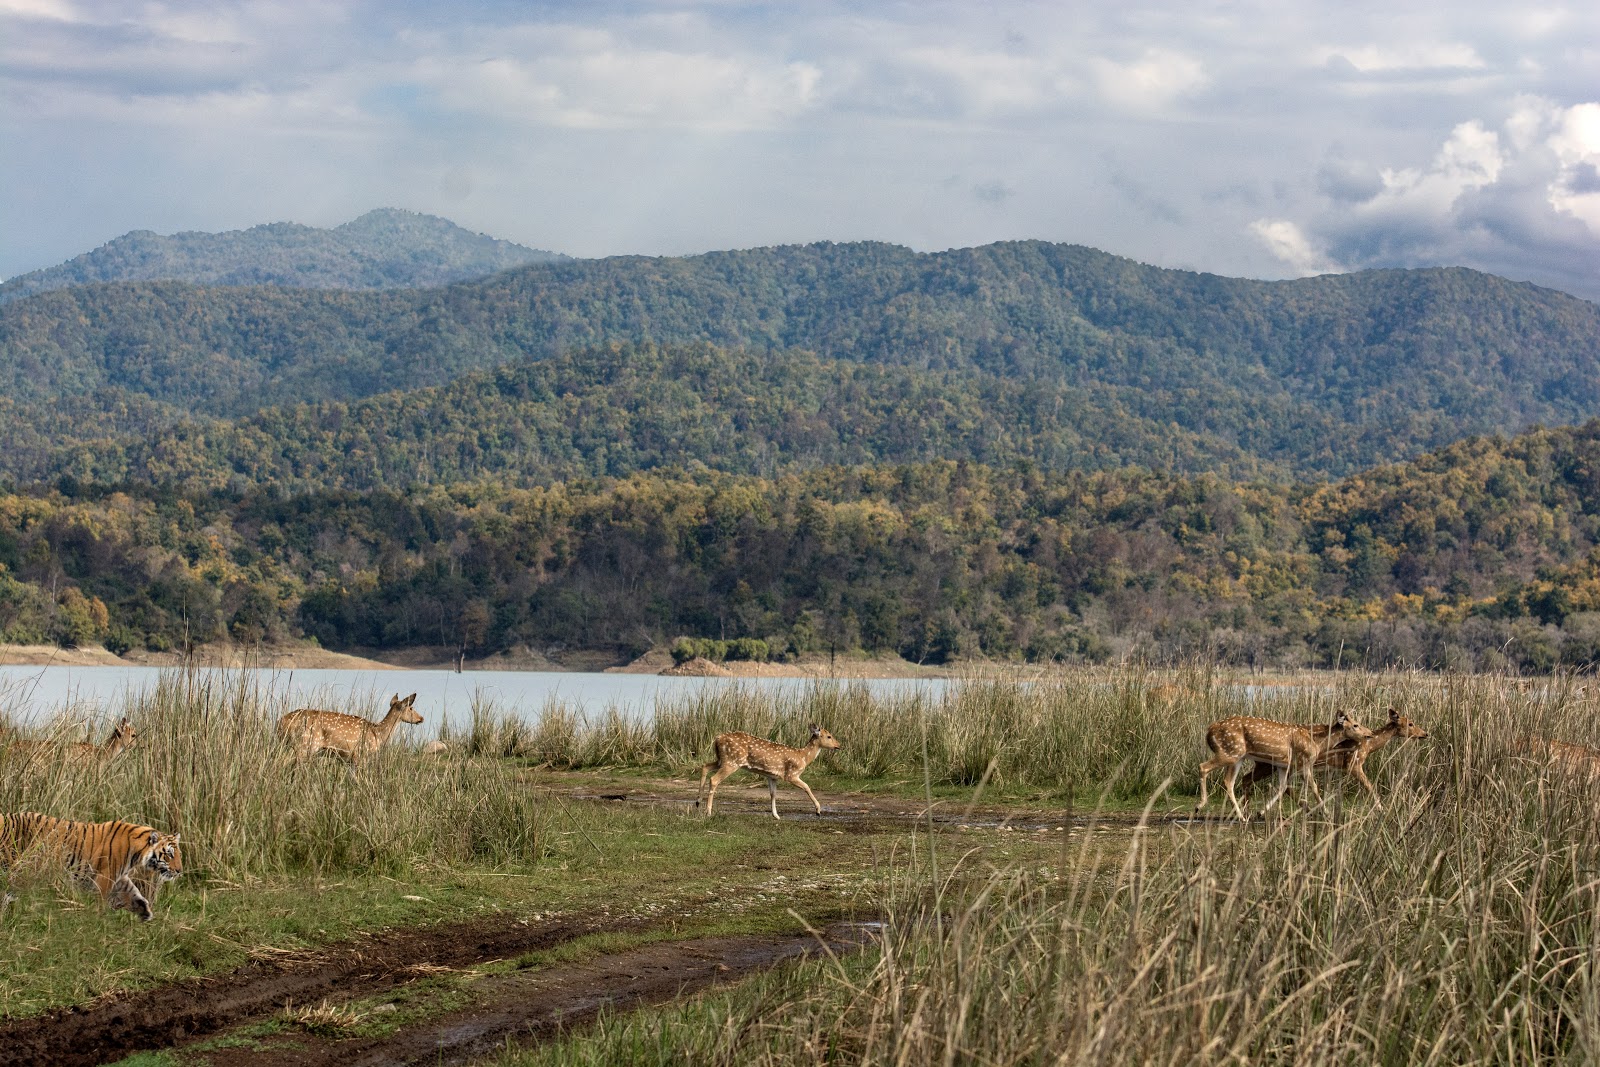 Deer walking through tall grass with mountains and a river in the background